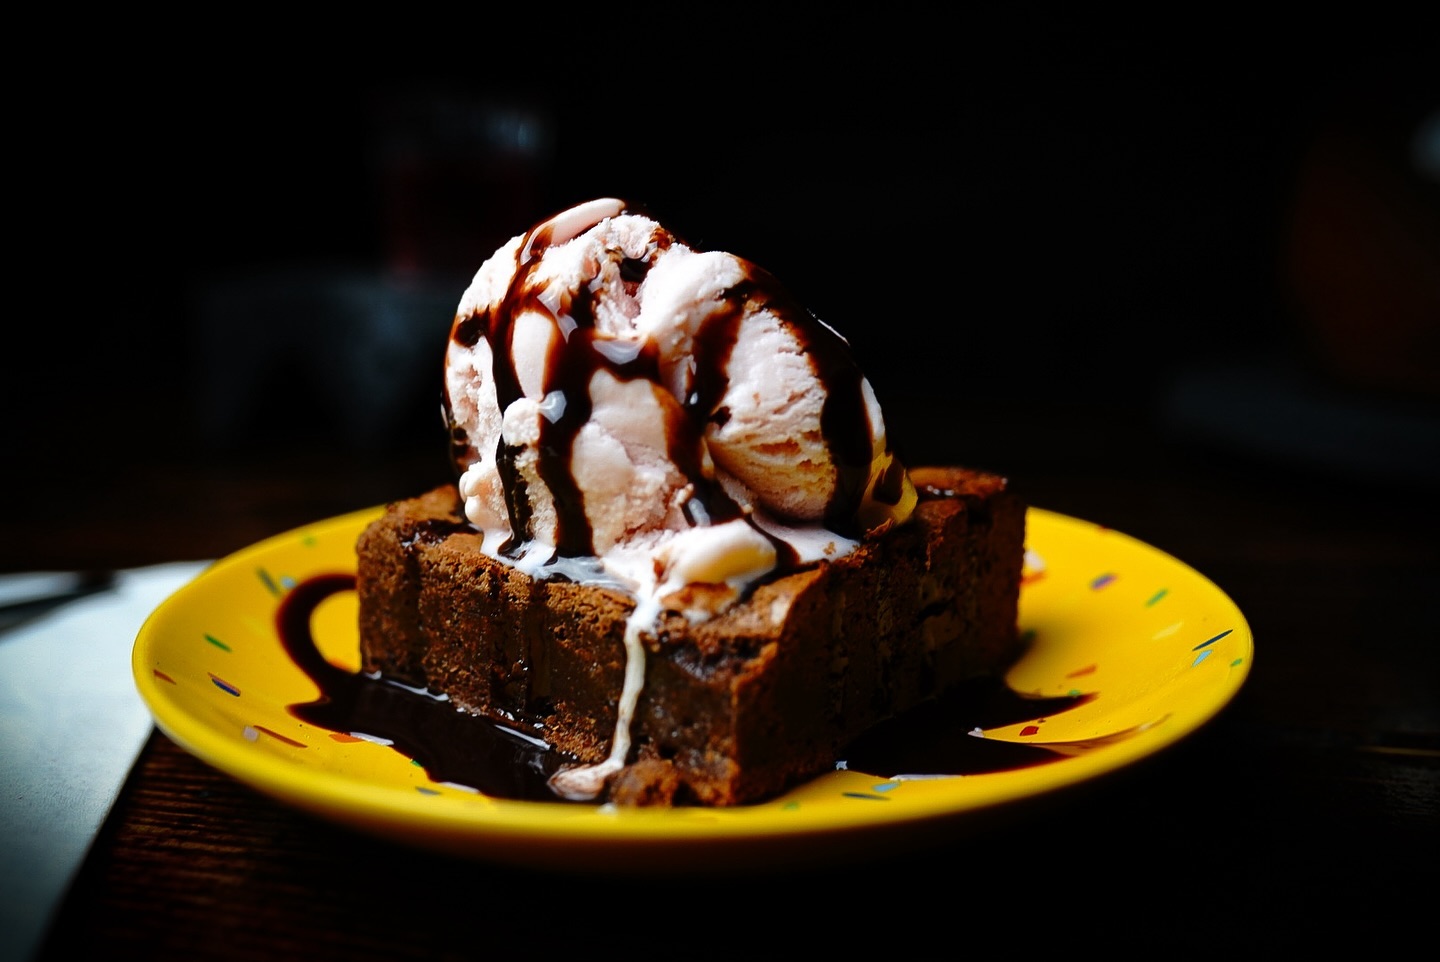 A delectable dessert of vanilla ice cream scoops on a toasted bread piece, generously drizzled with chocolate syrup, served on a vibrant yellow plate.